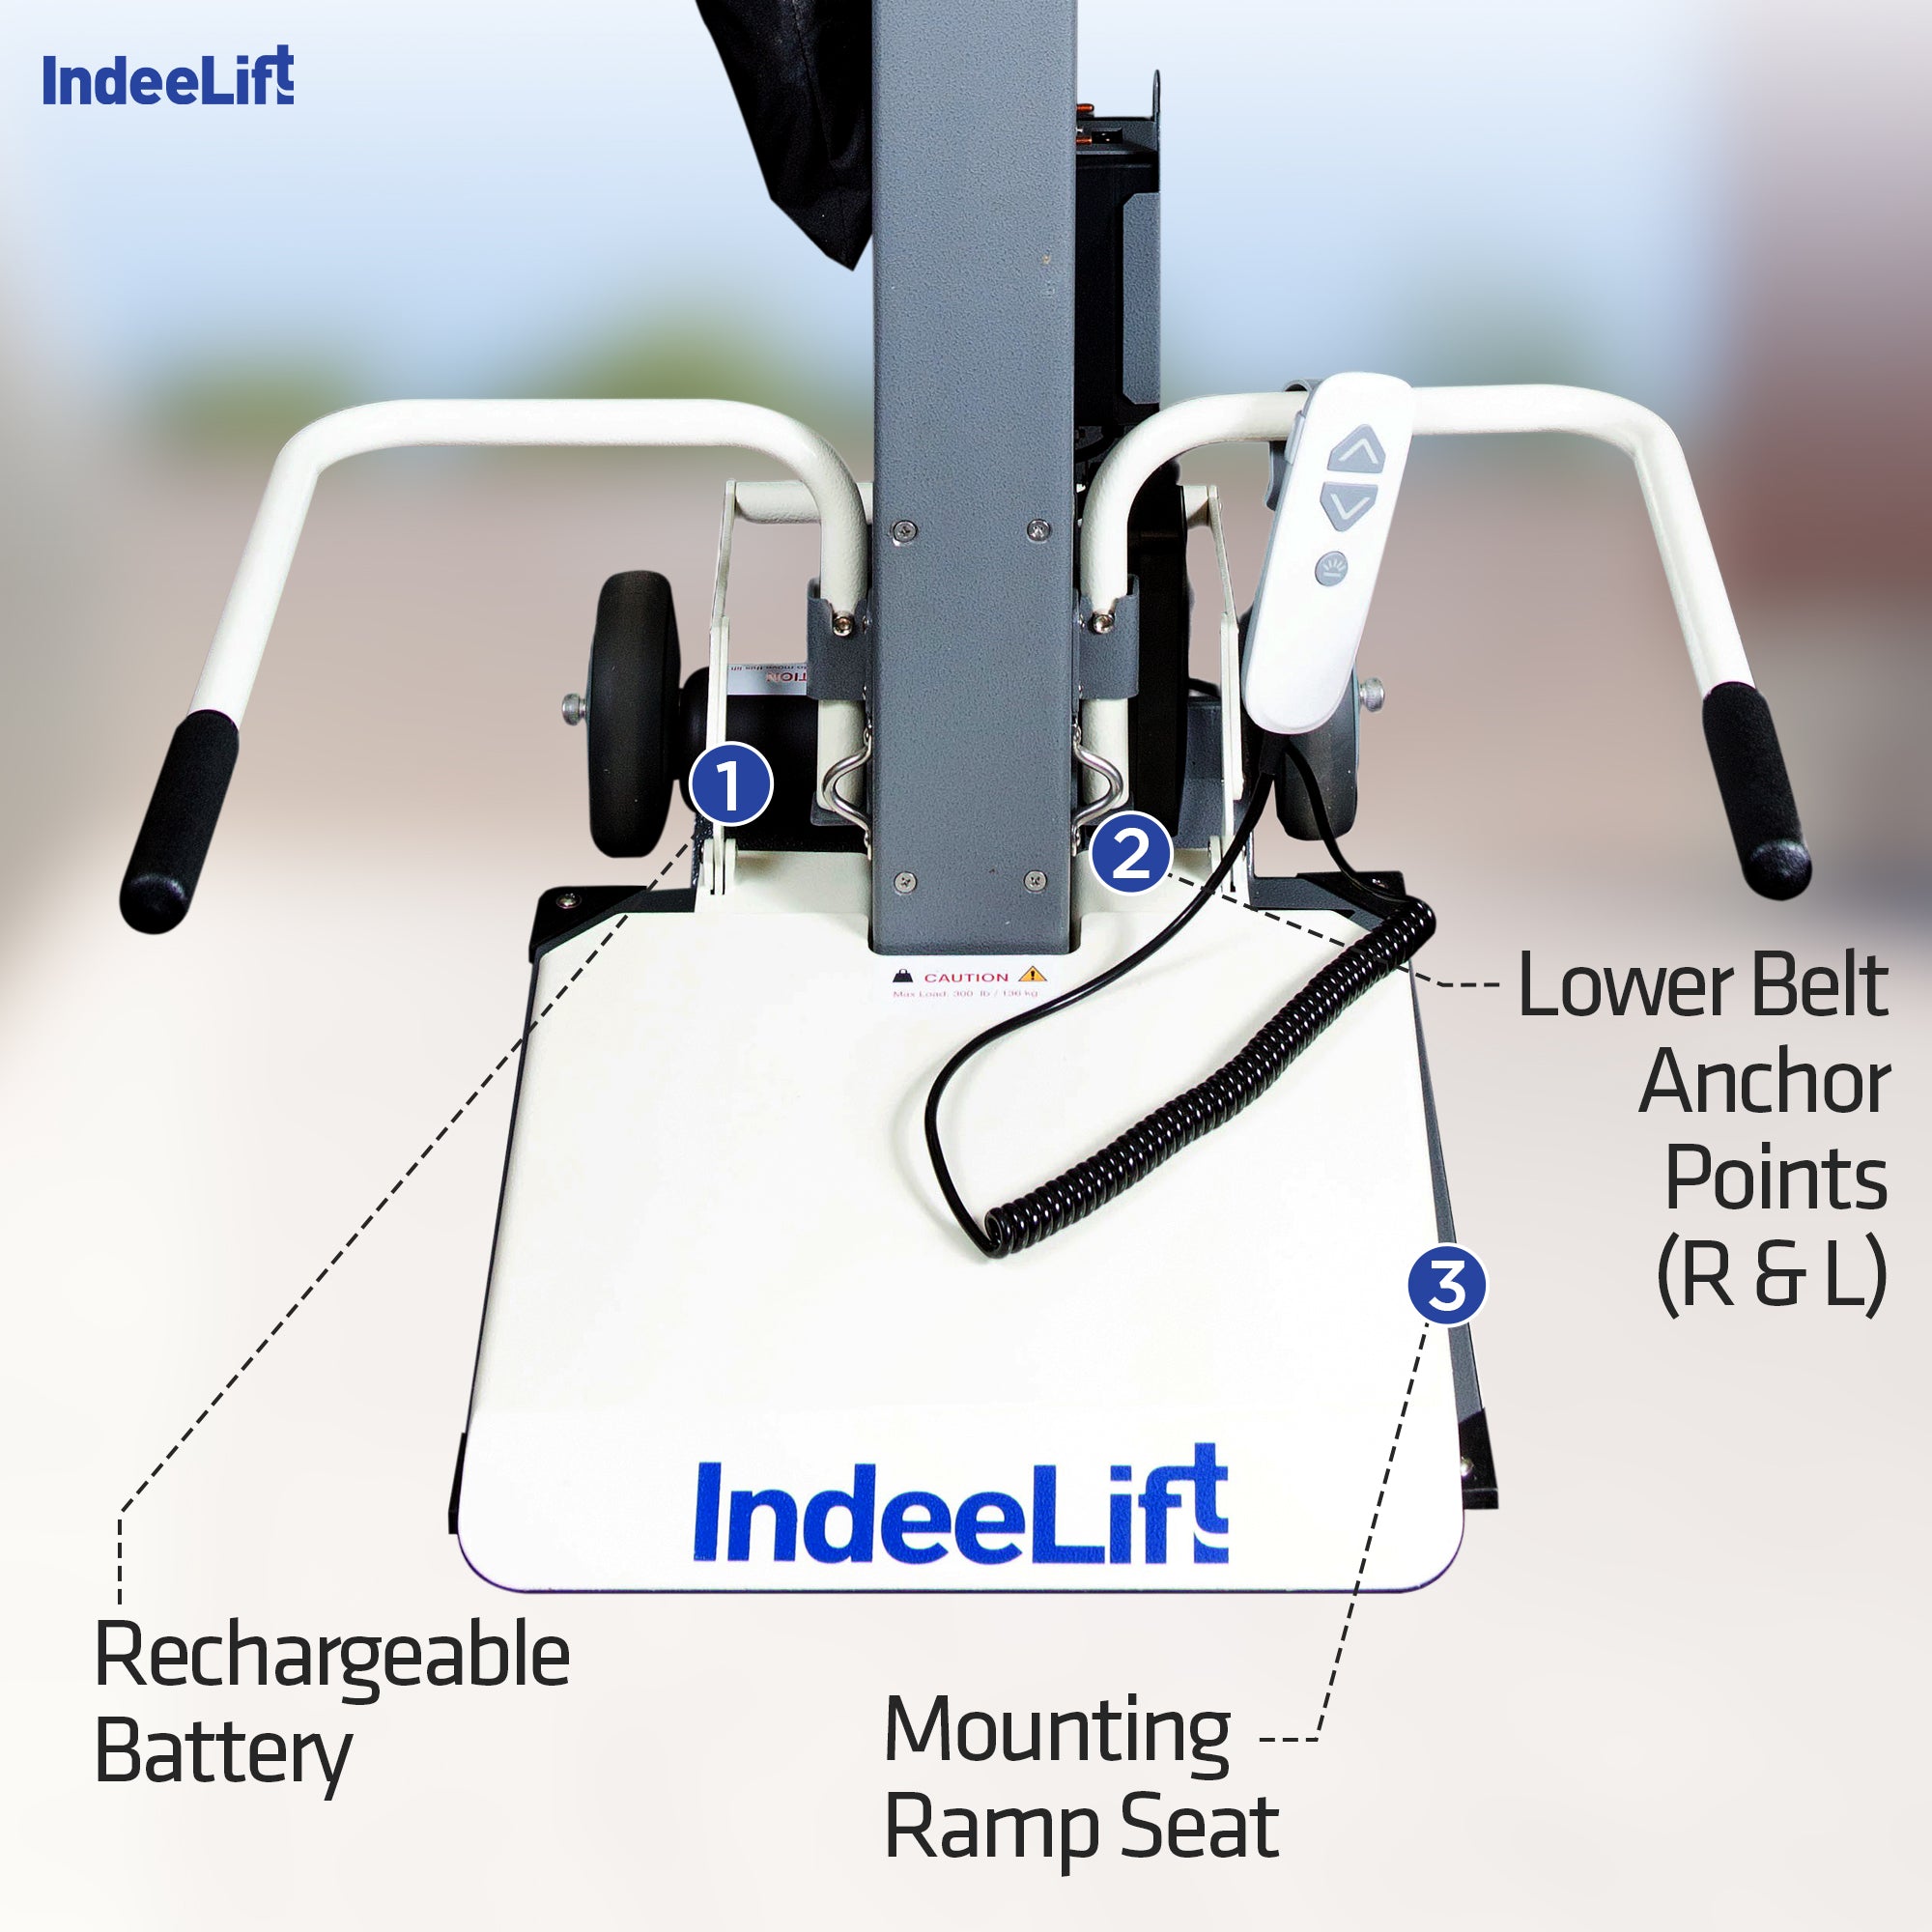 IndeeLift People Picker Upper | PPU-S 300 | Lift Assist, Fall Recovery, Transfer Aid